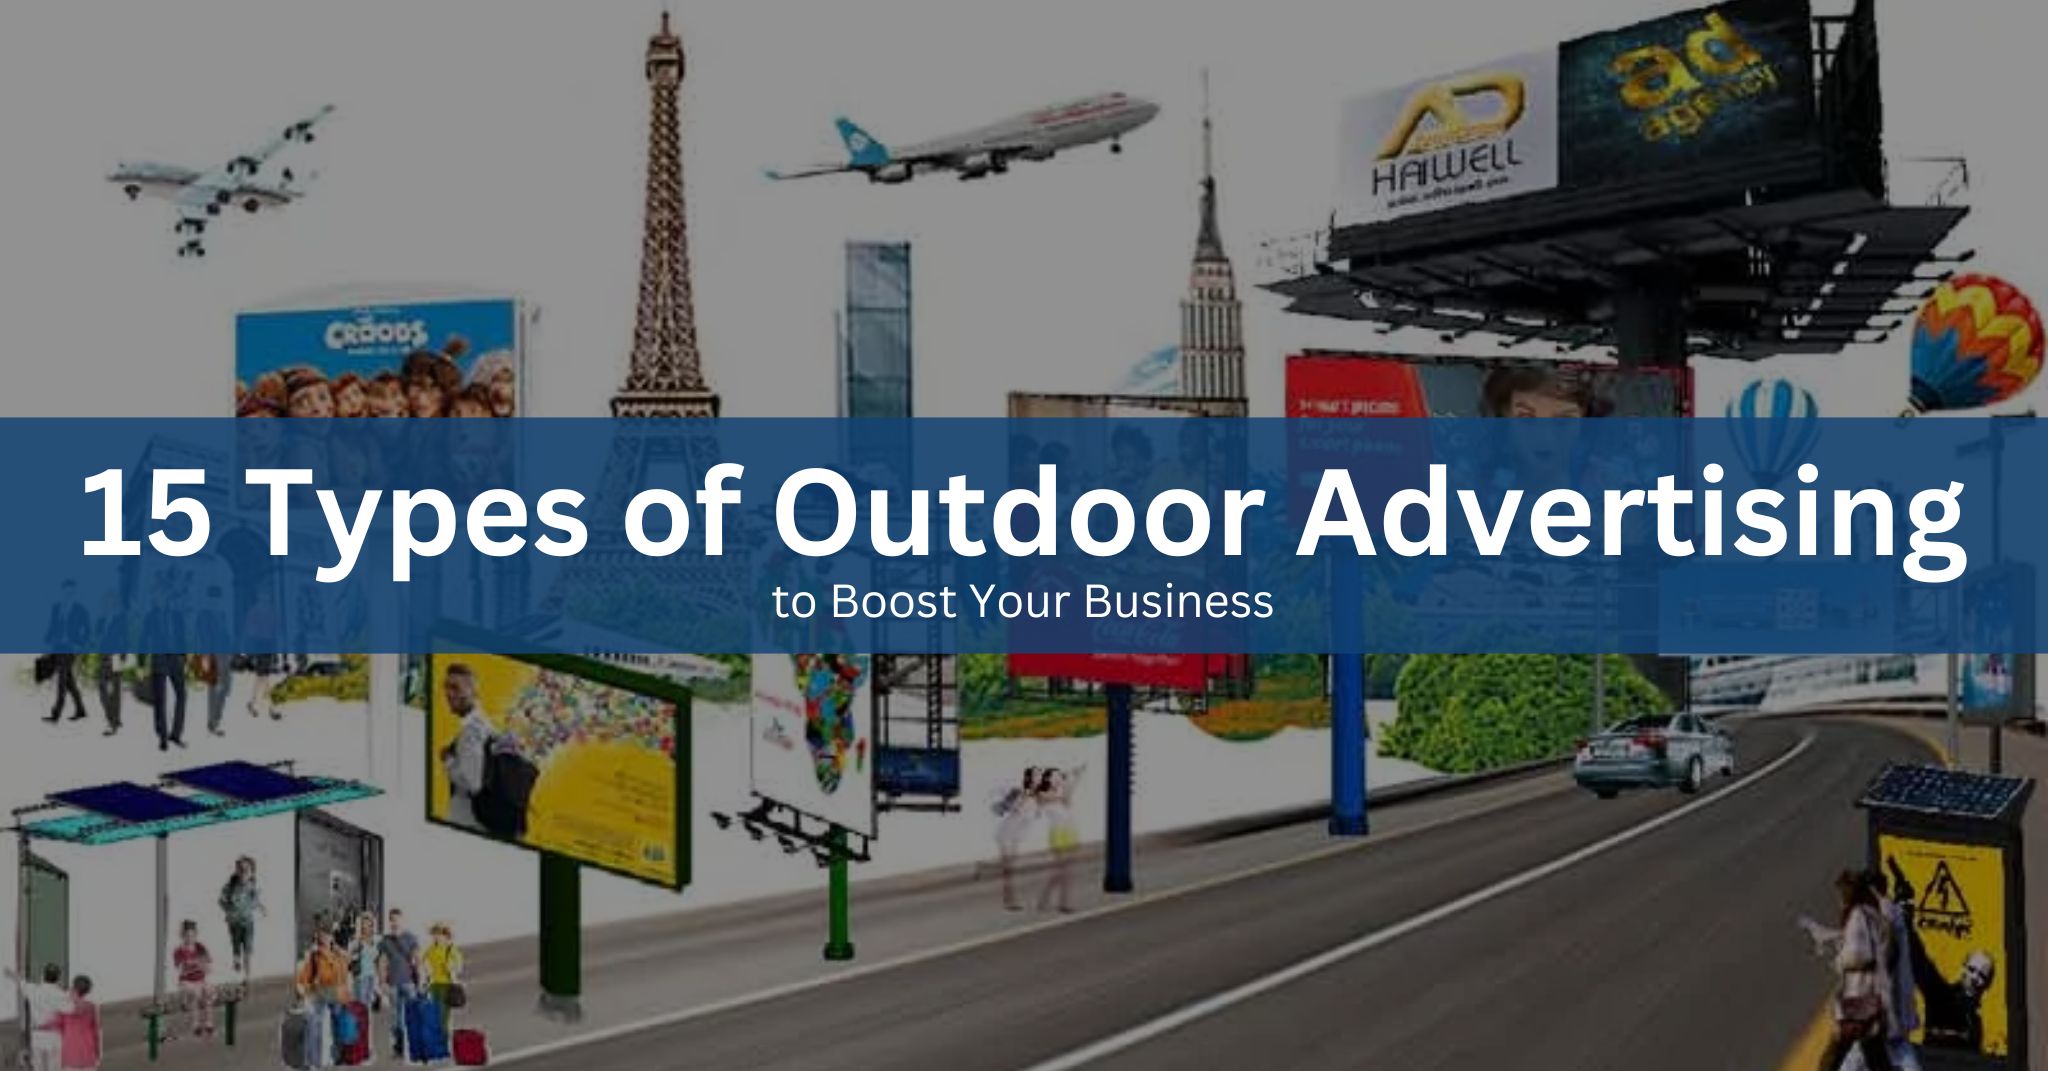 15 Types of Outdoor Advertising to Boost Your Business | Expert Guide